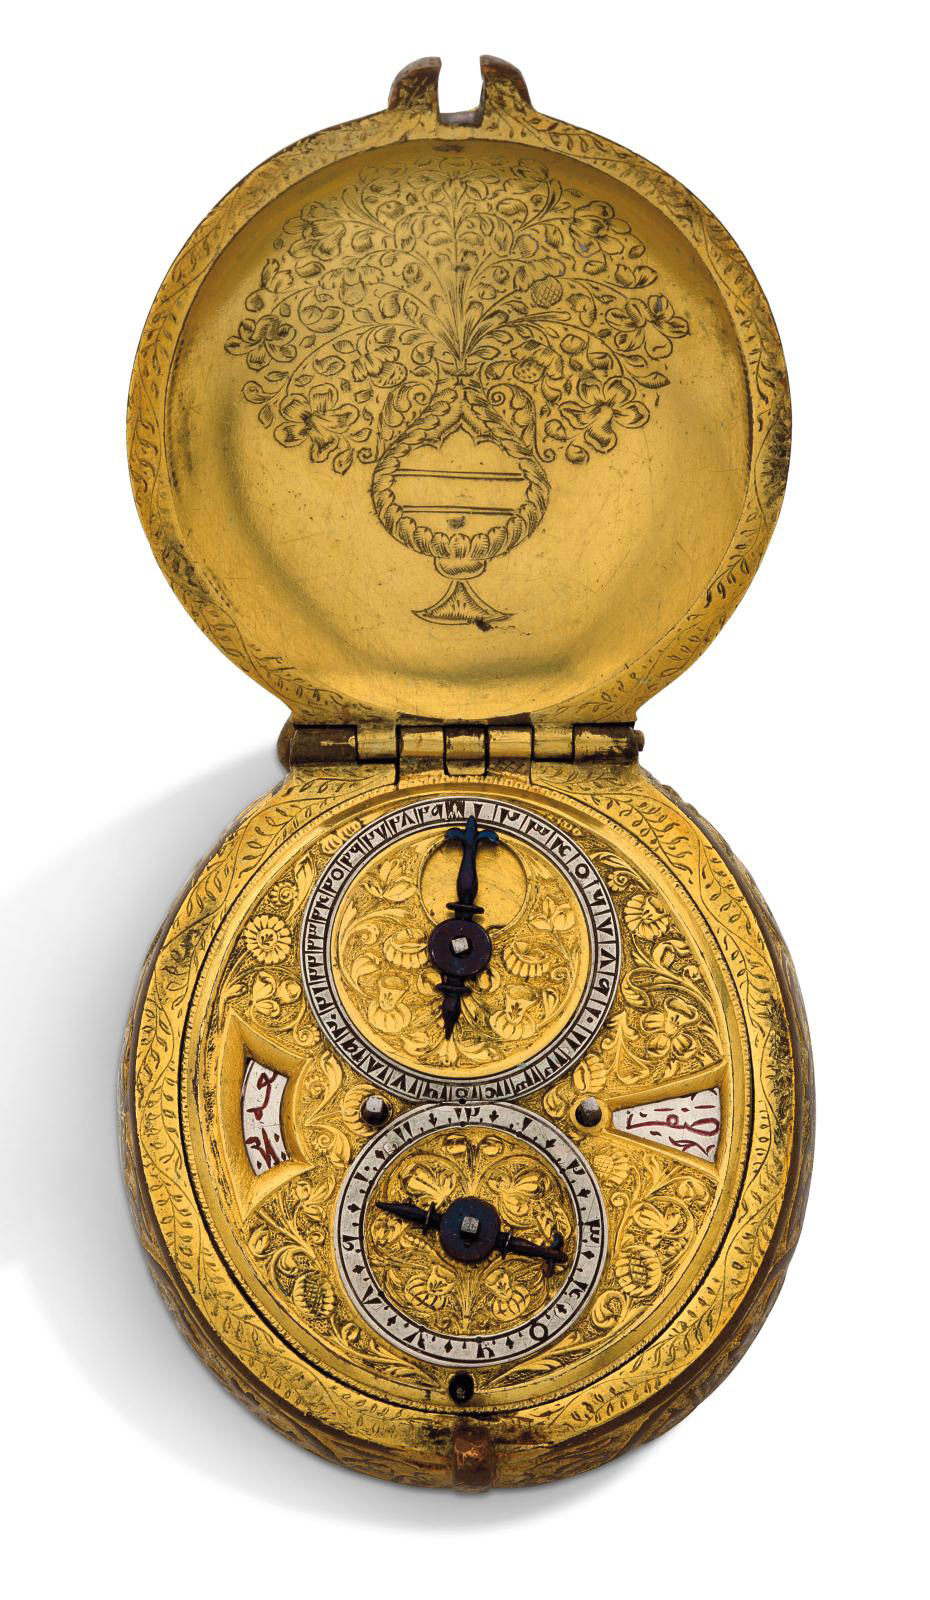 Swiss work, mid-17th century, gilded metal oval astronomical watch made for the Ottoman market, decorated with foliage, flowers, a stylize